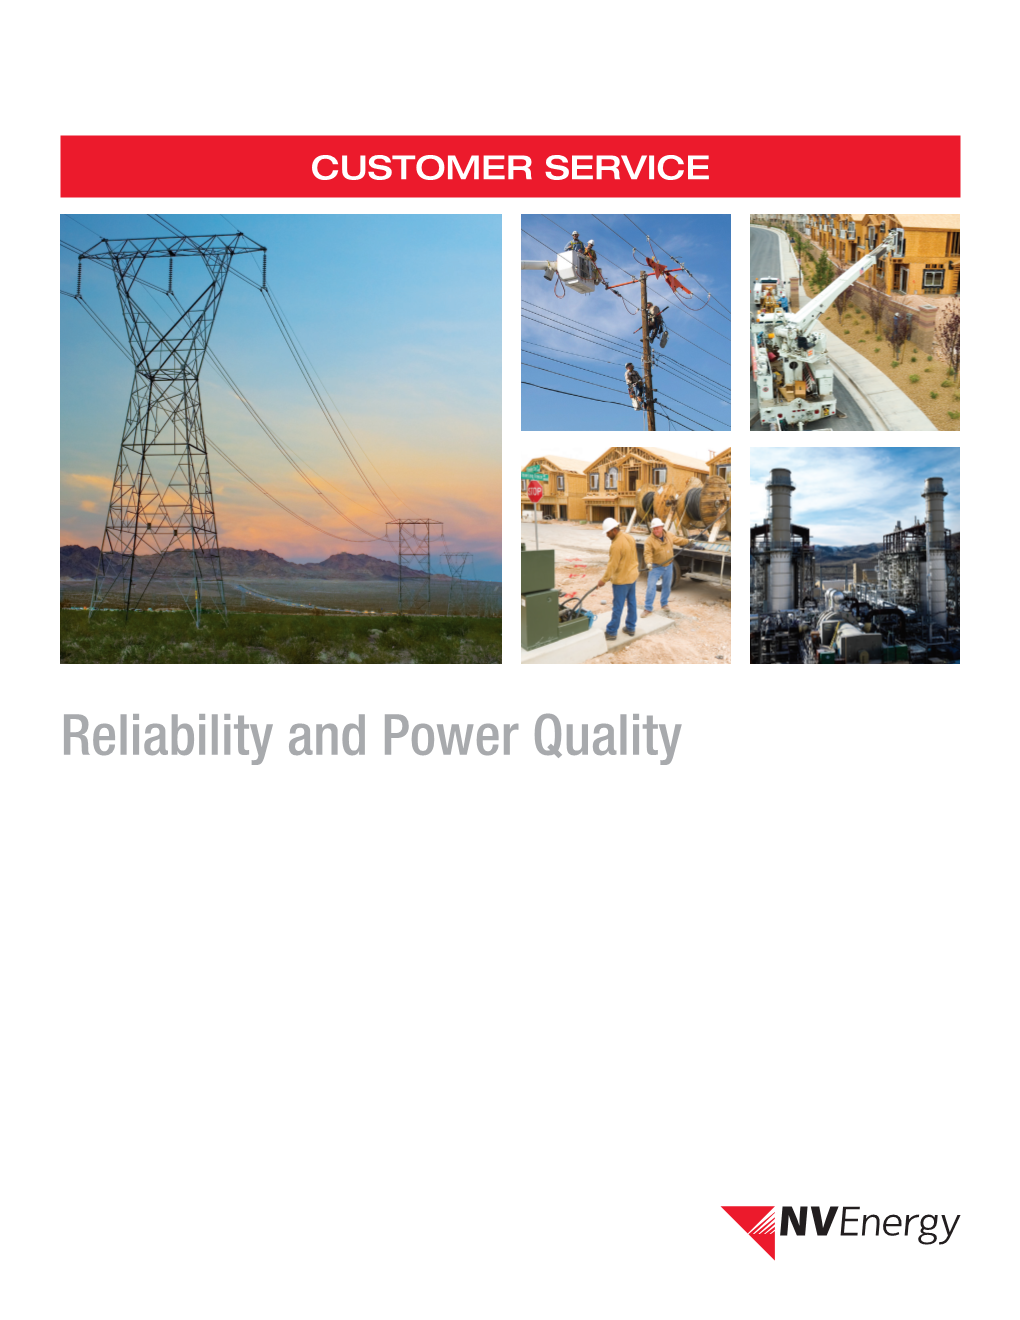 NV Energy Reliability and Power Quality Brochure